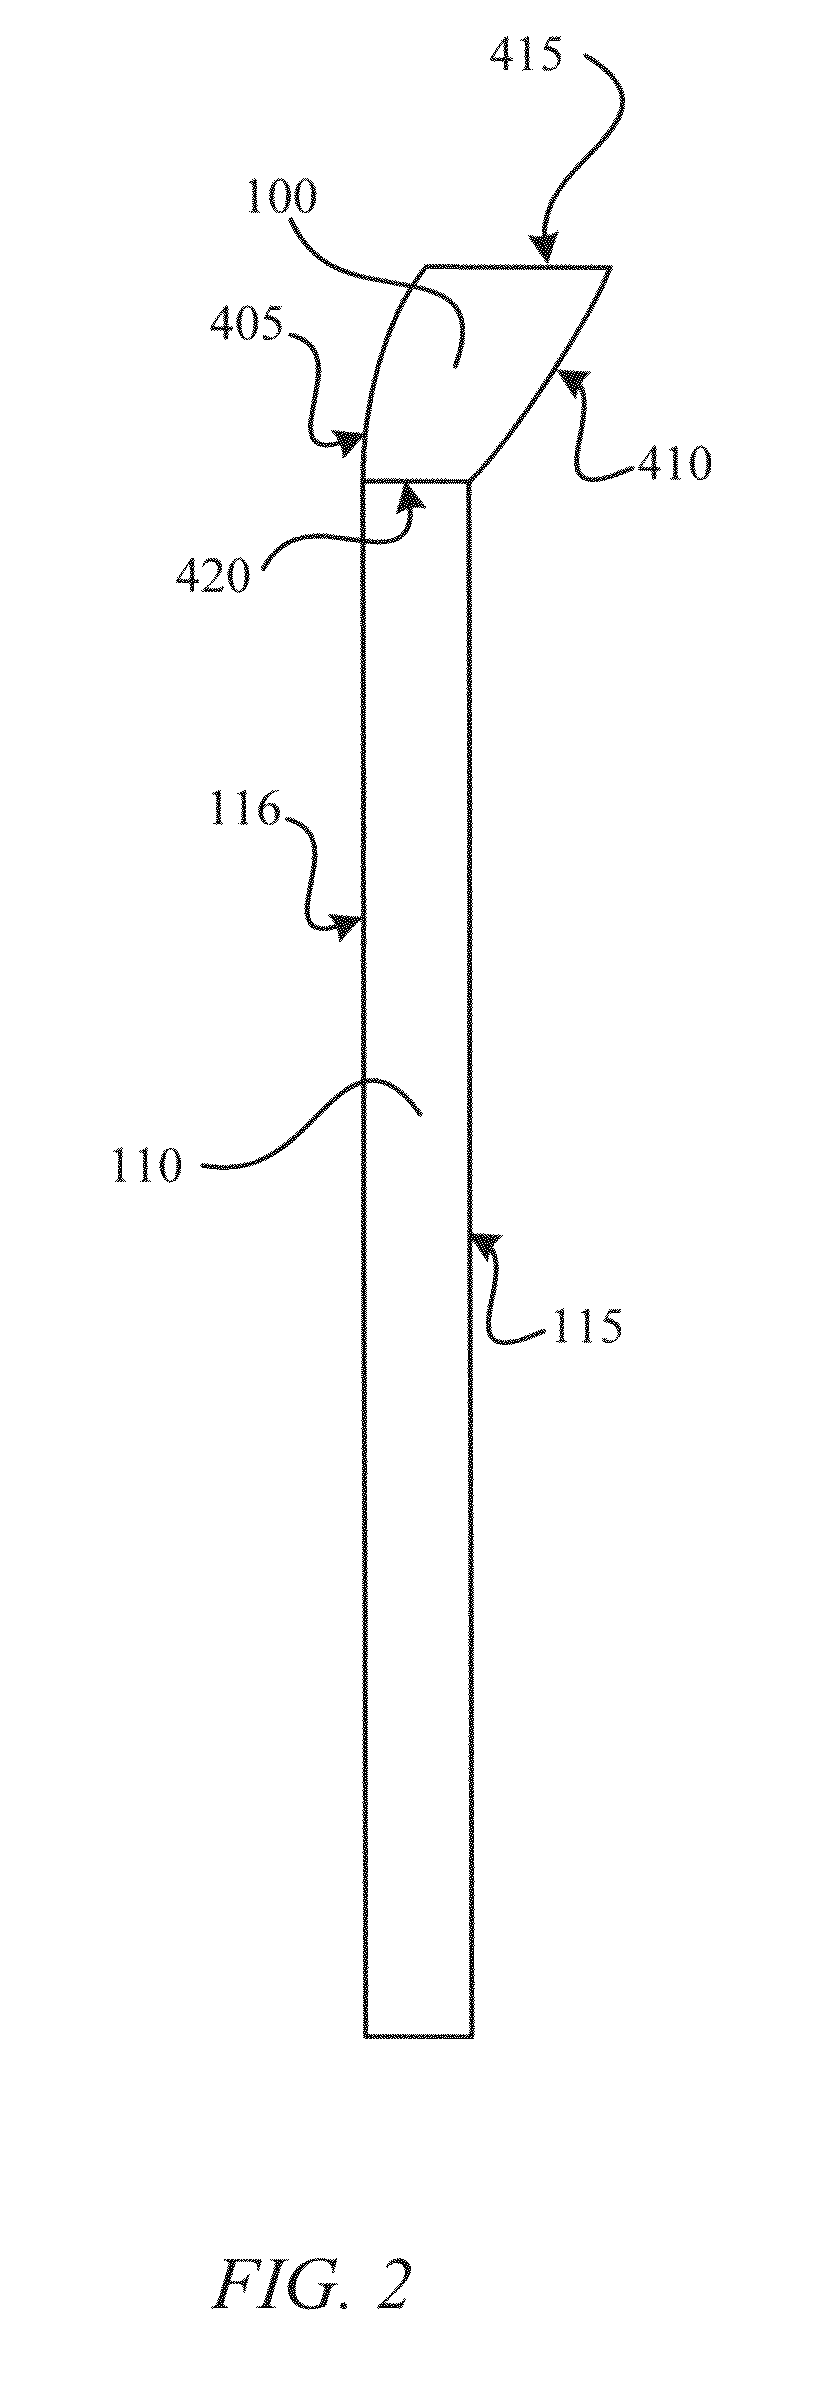 Asymmetric compound parabolic concentrator and related systems